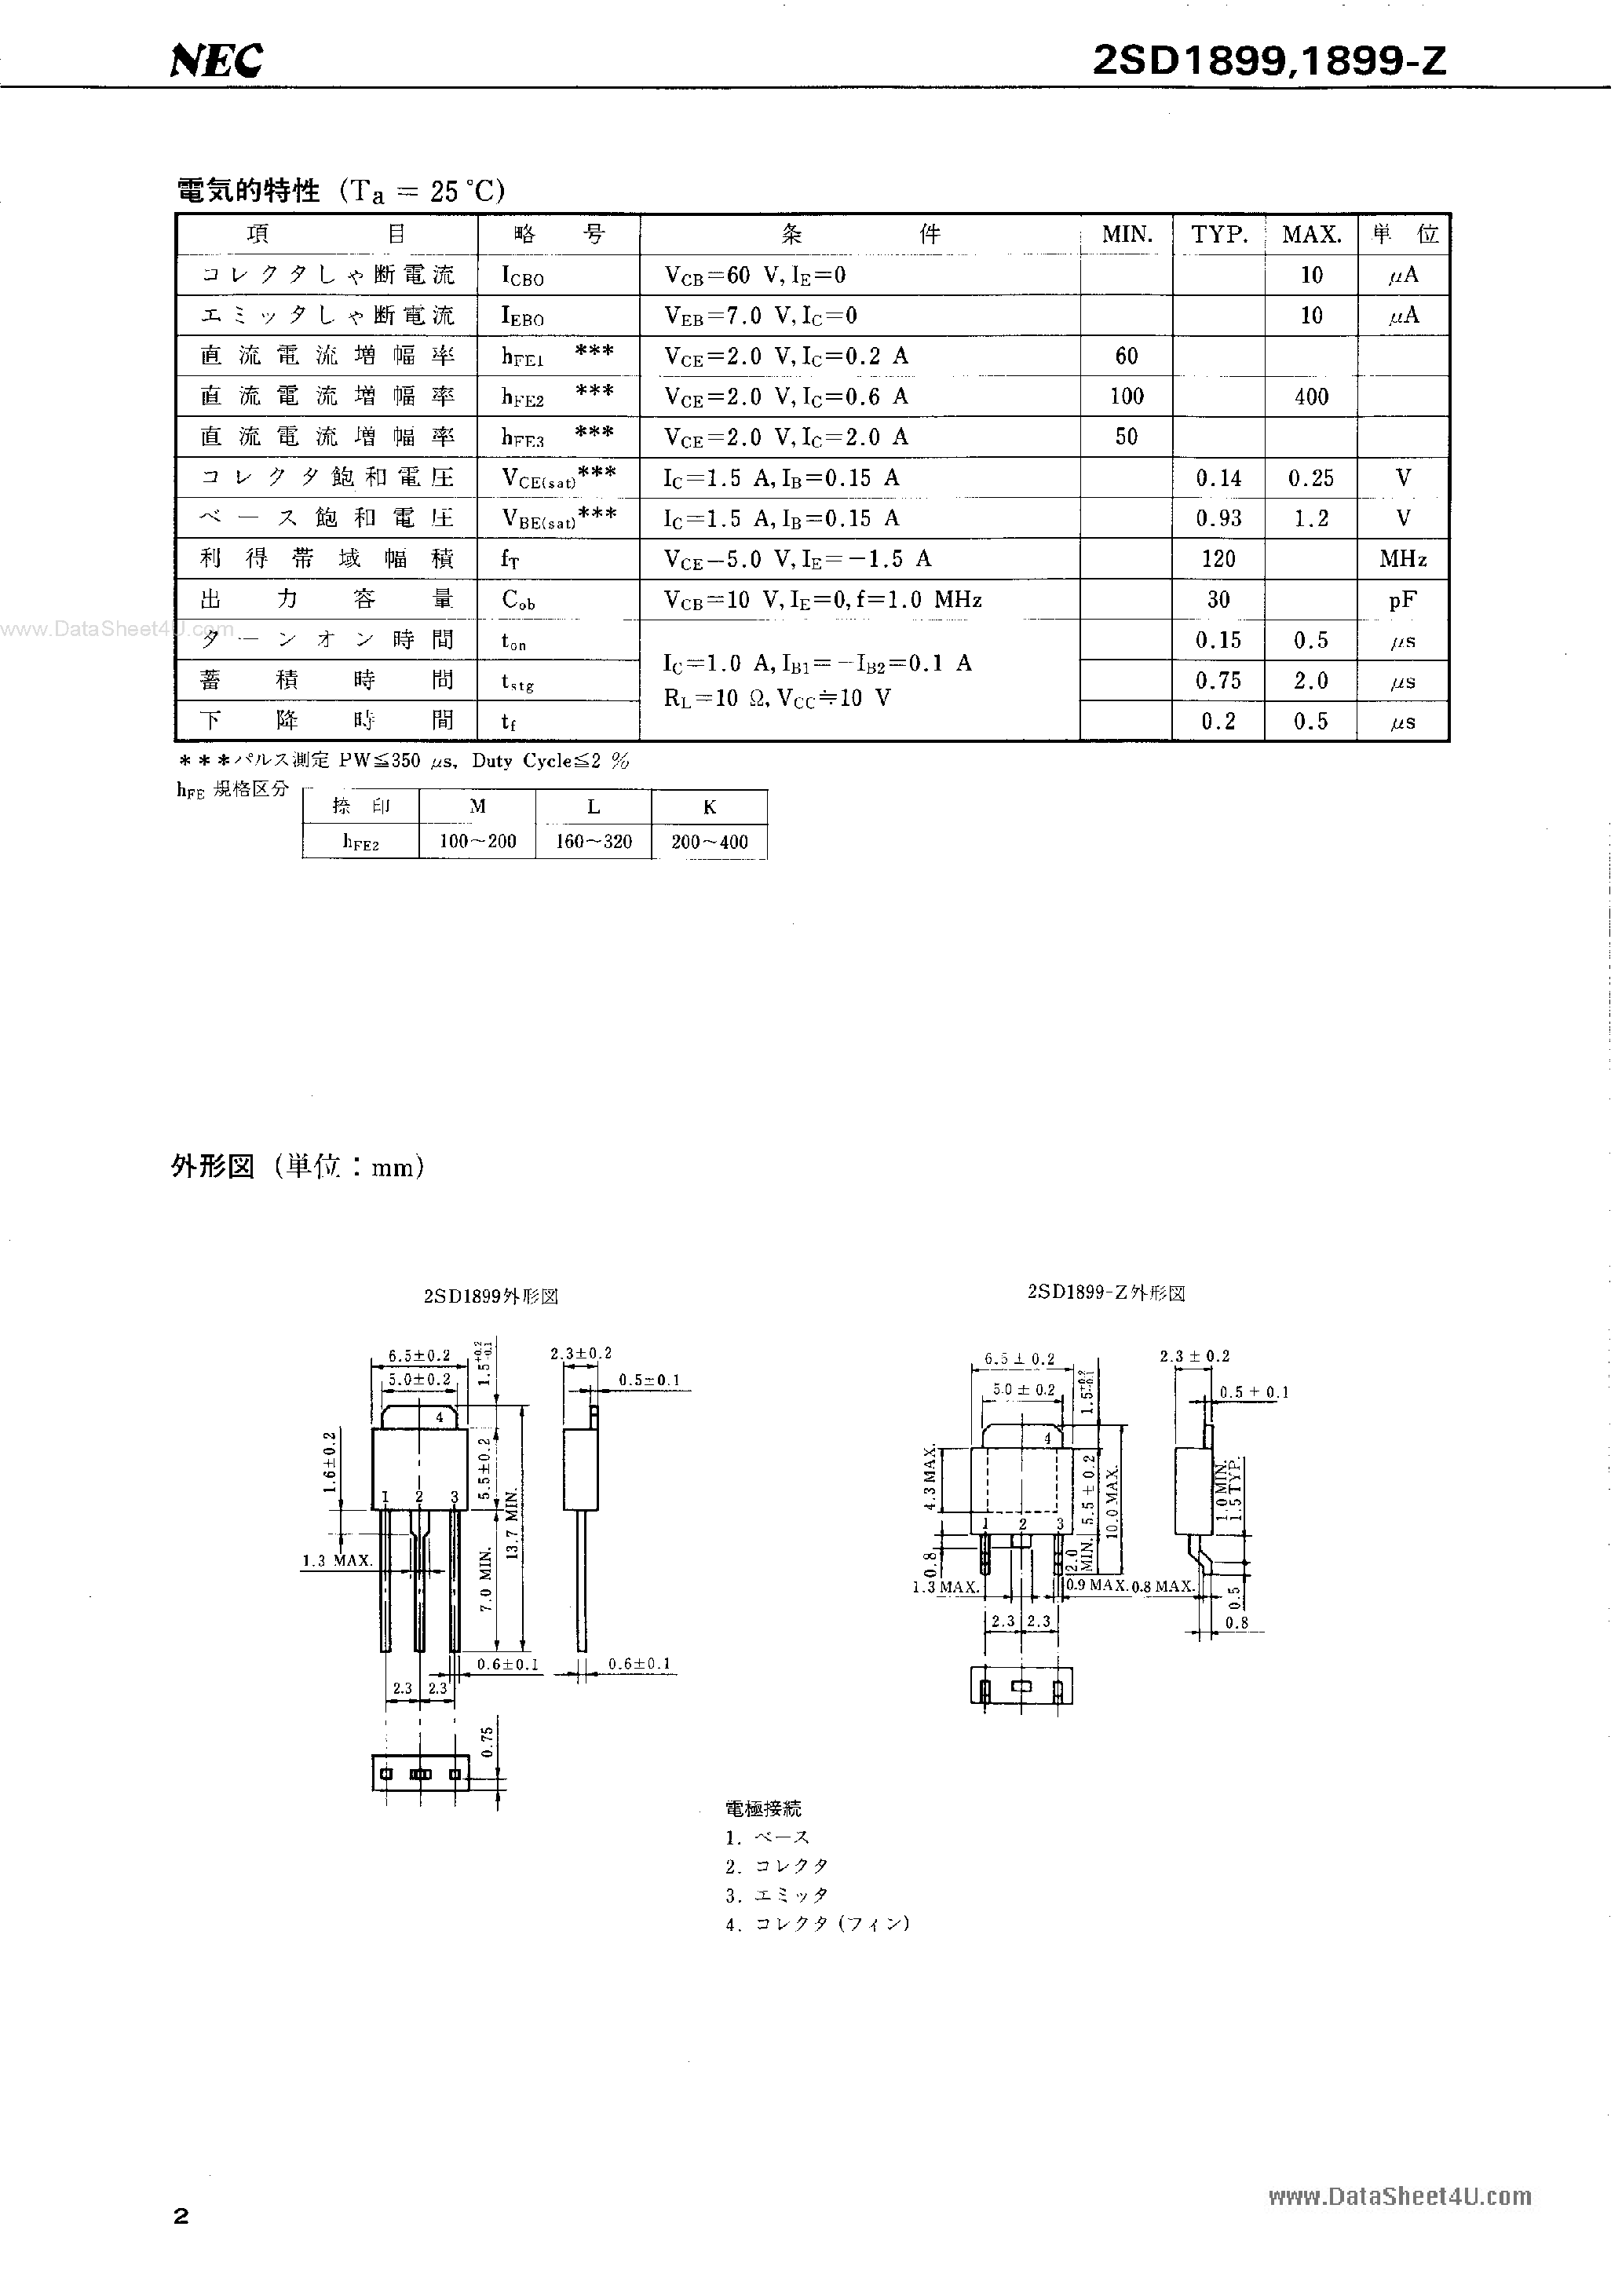 Datasheet D1899 - Search ---> 2SD1899 page 2